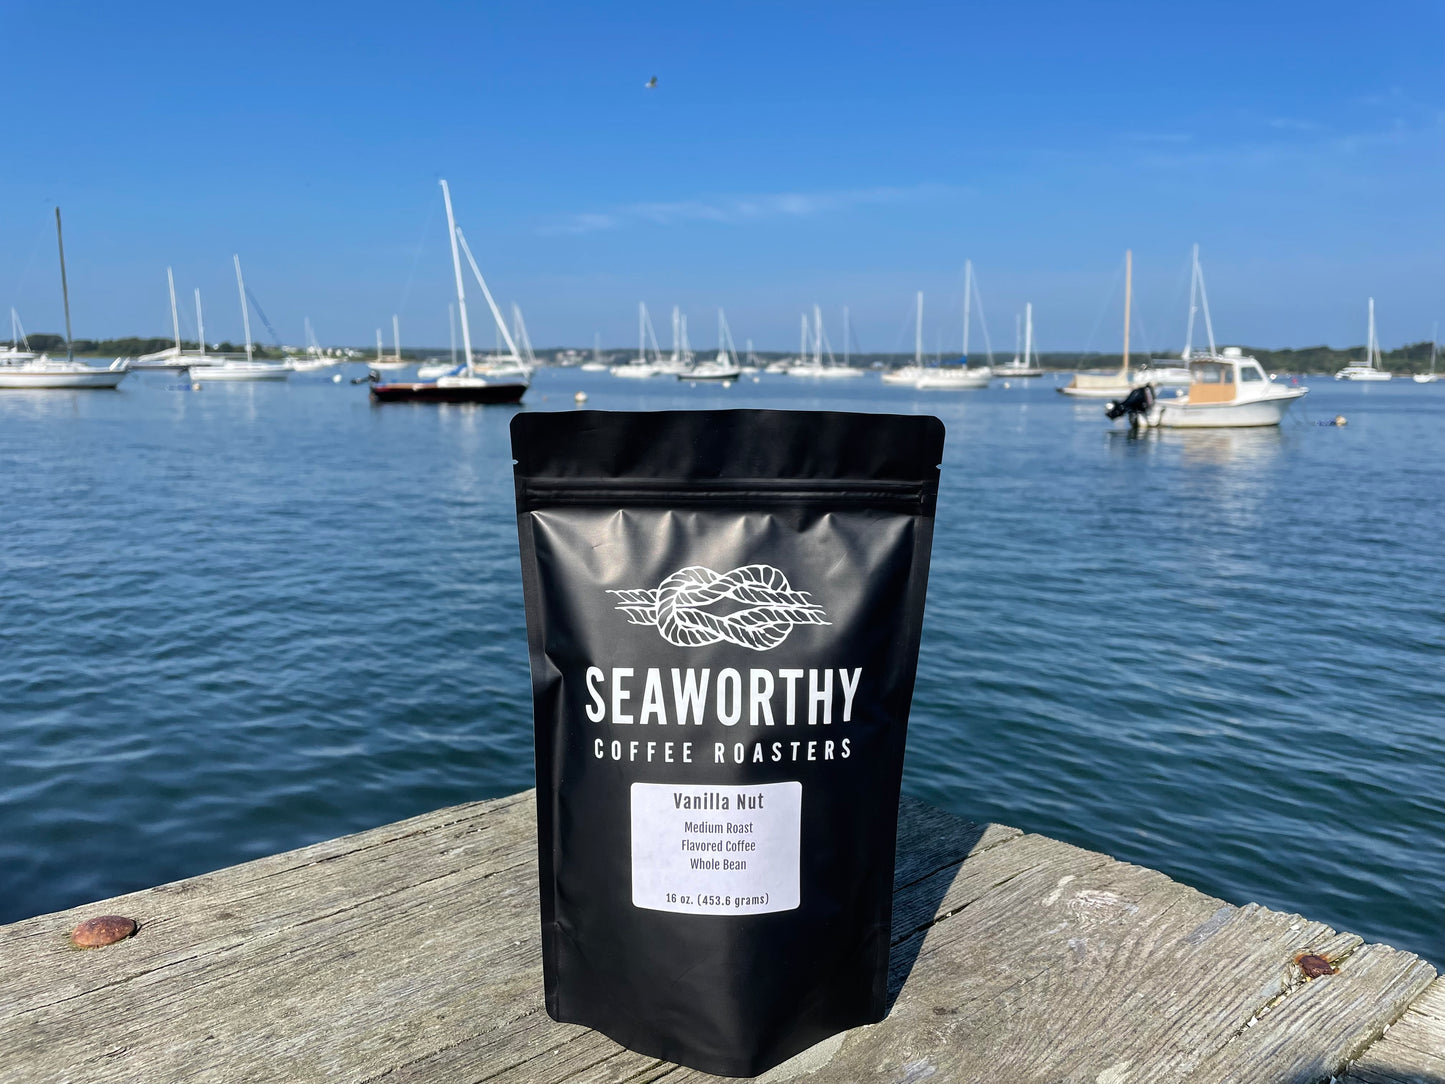 Seaworthy slow roasted, small batch coffee. Vanilla Nut is simply delightful.  It tastes of decadent vanilla with a nutty backdrop and can be enjoyed hot, iced, or cold brewed any day!